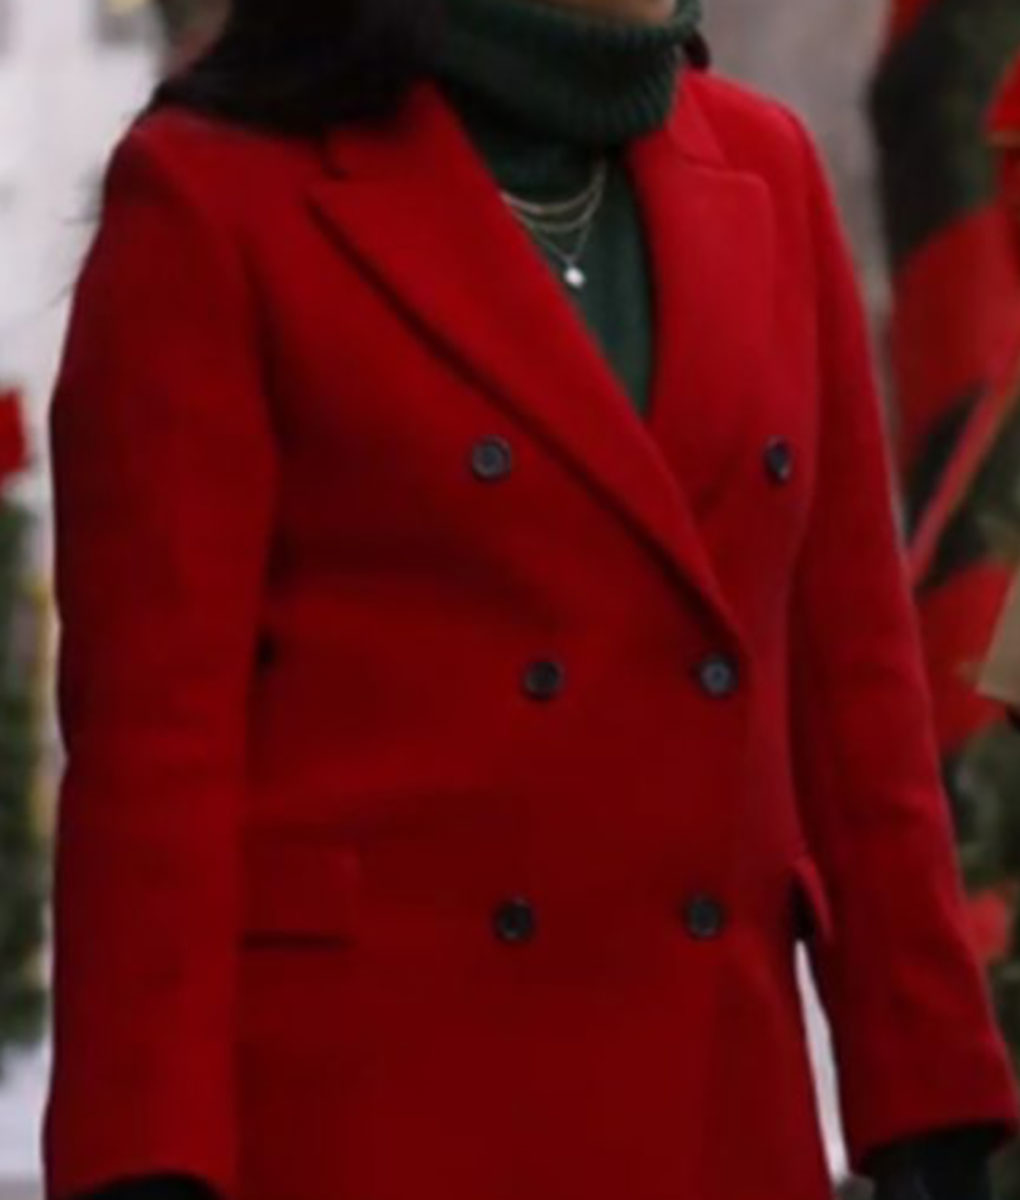 Tia Mowry Yes Chef Christmas Red Coat (1)